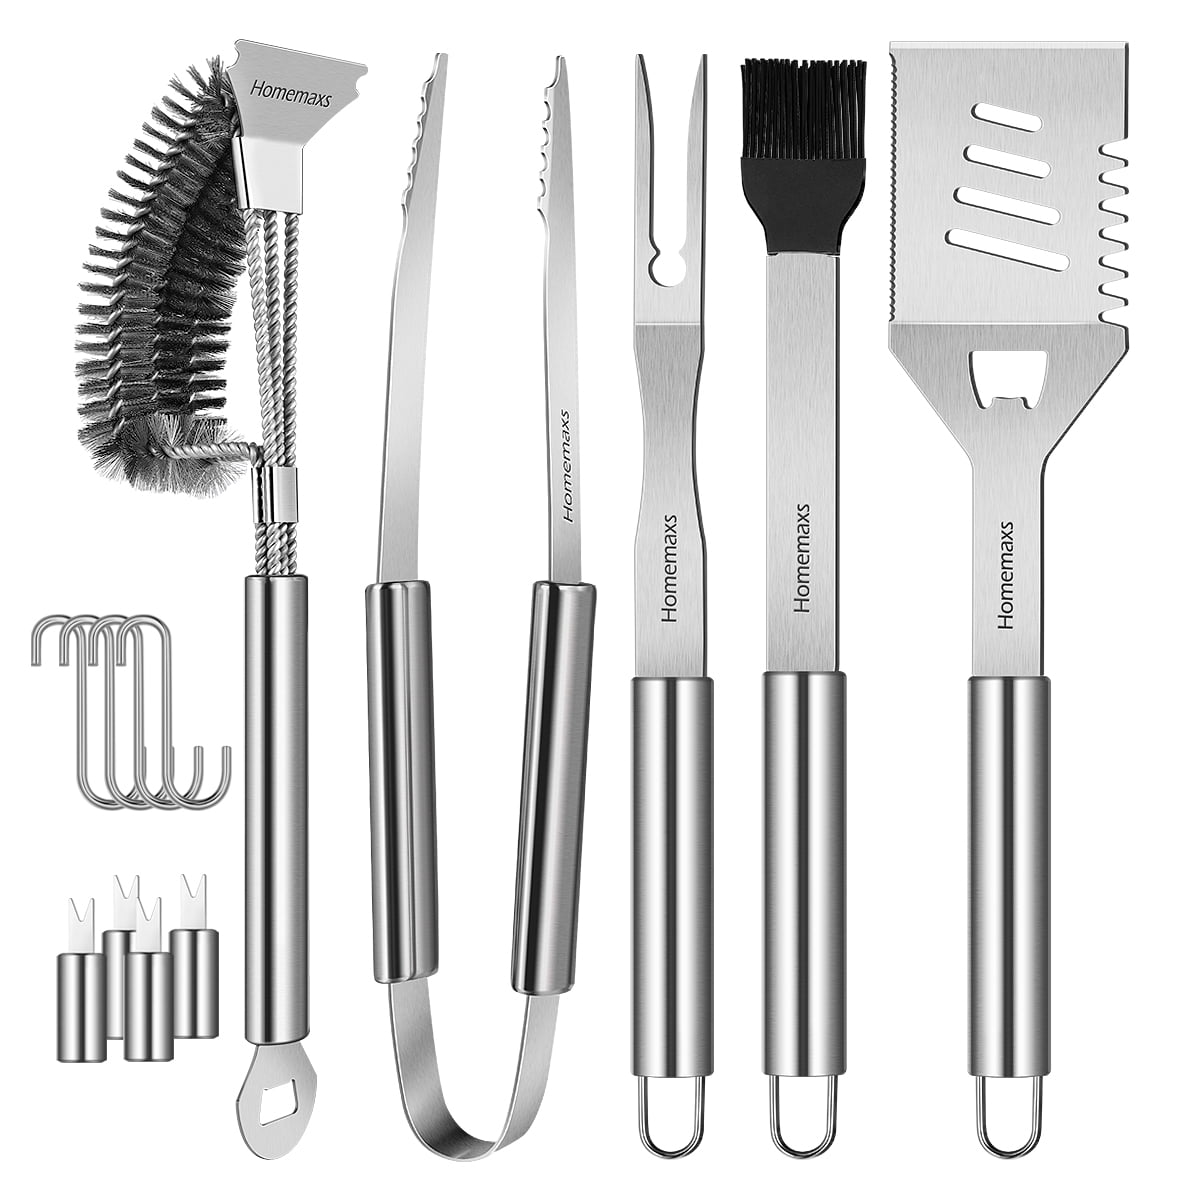 Cooking Accessory BBQ Grill Tool Stainless Steel Set 858540LHH - The Home  Depot